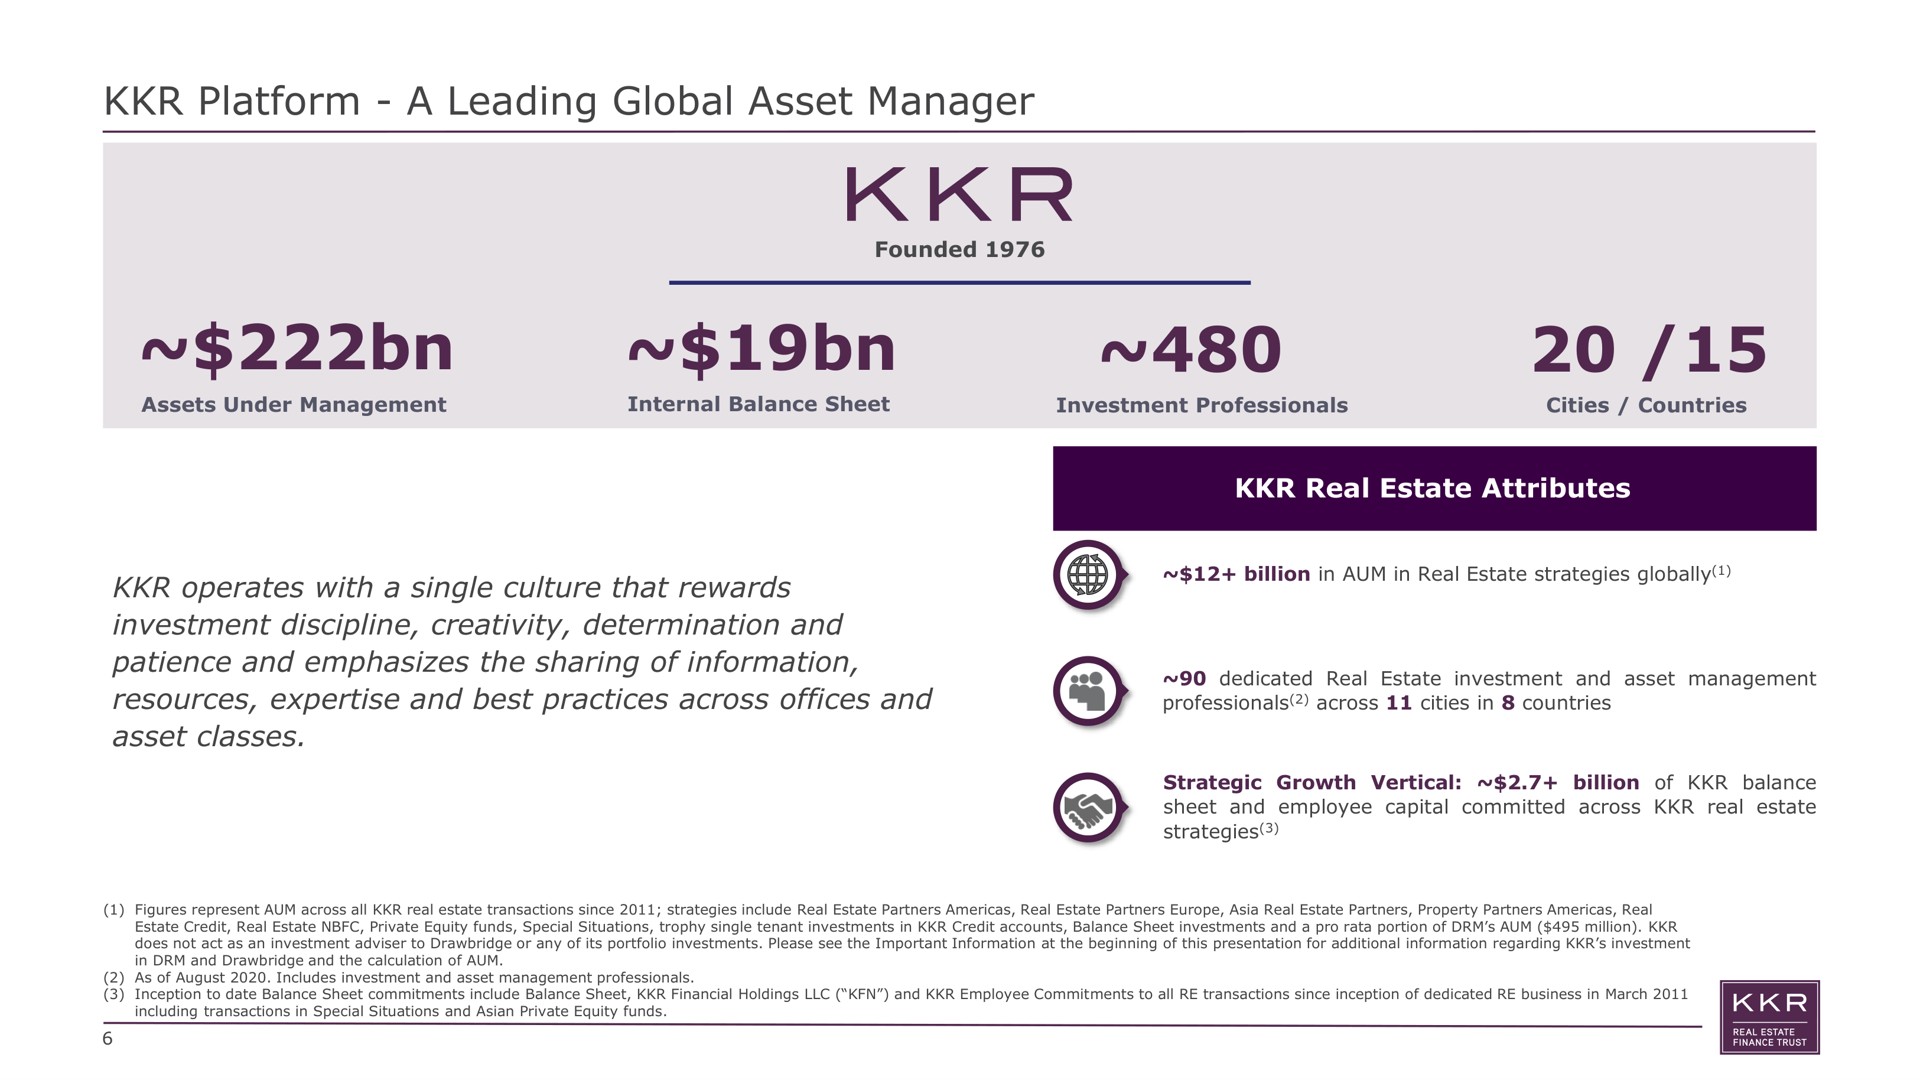 platform a leading global asset manager operates with a single culture that rewards investment discipline creativity determination and patience and emphasizes the sharing of information resources and best practices across offices and asset classes | KKR Real Estate Finance Trust